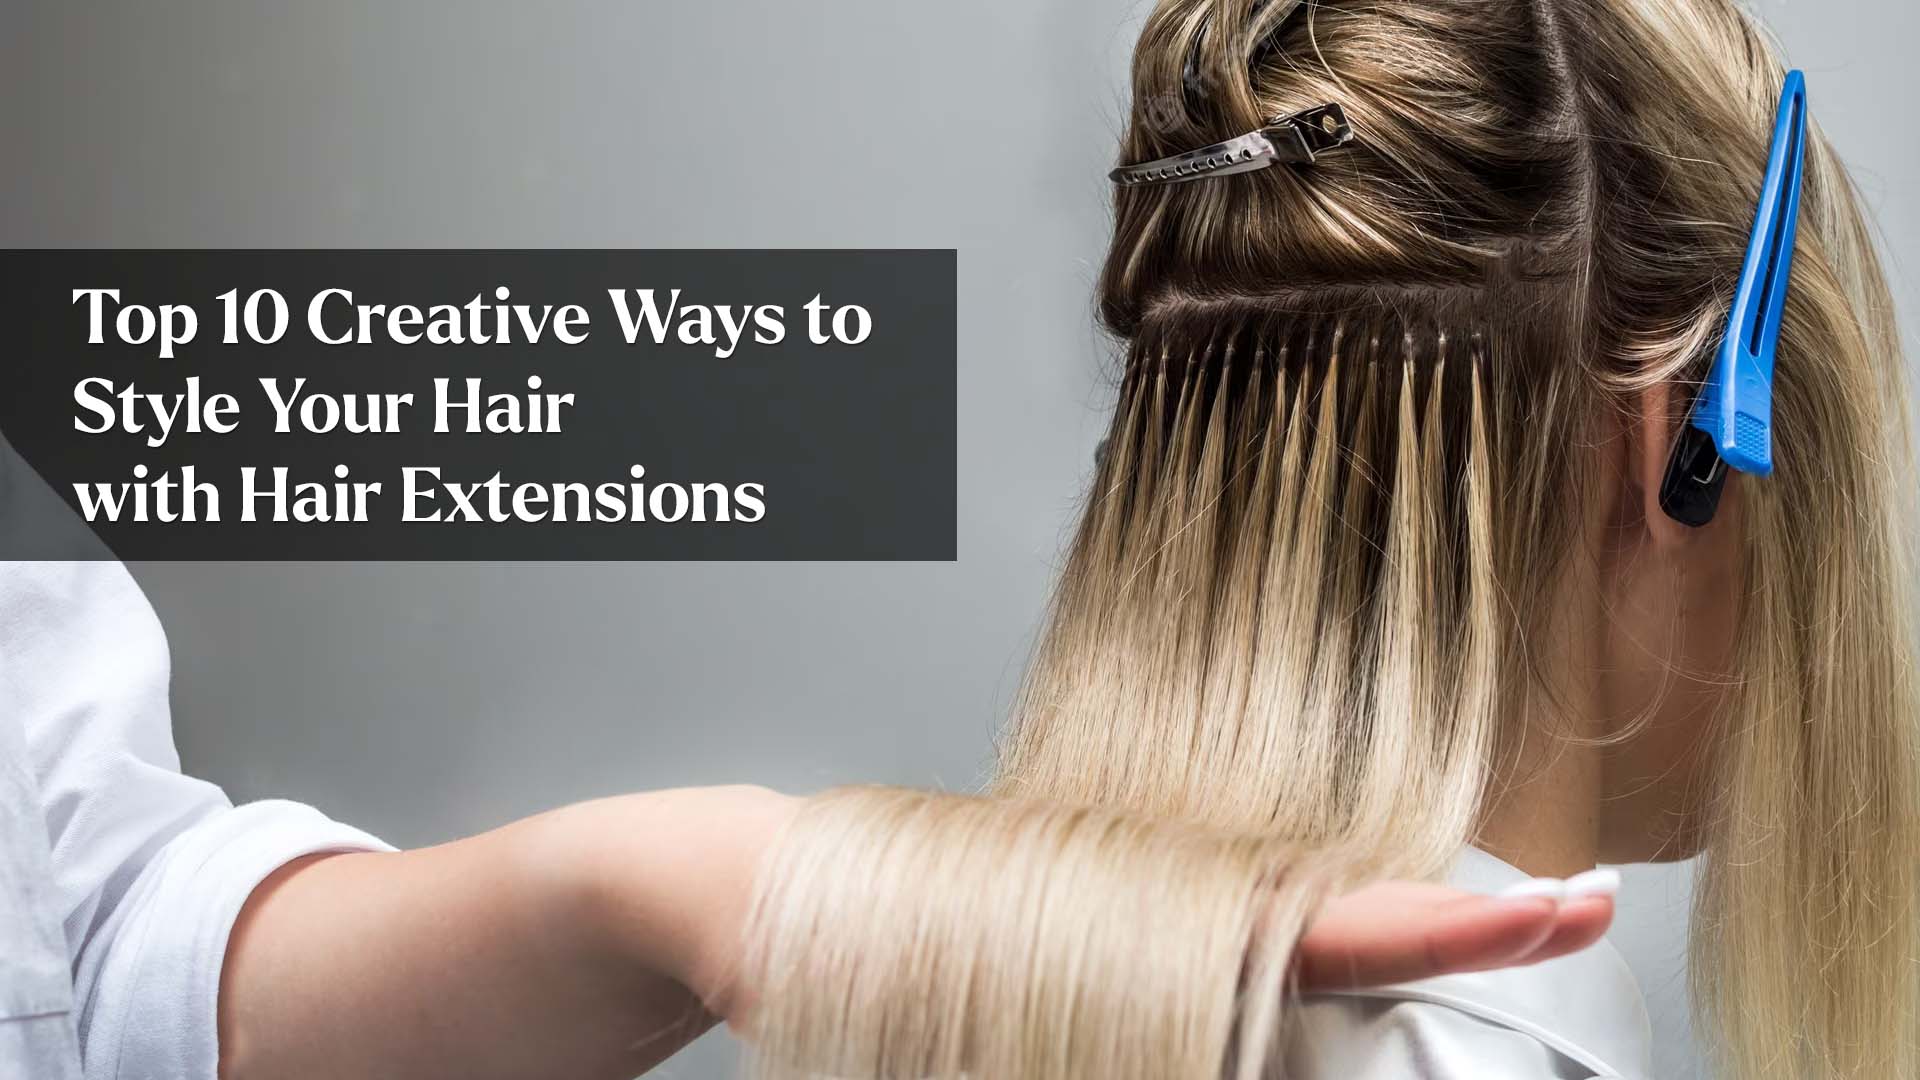 Top 10 Creative Ways to Style Your Hair with Hair Extensions